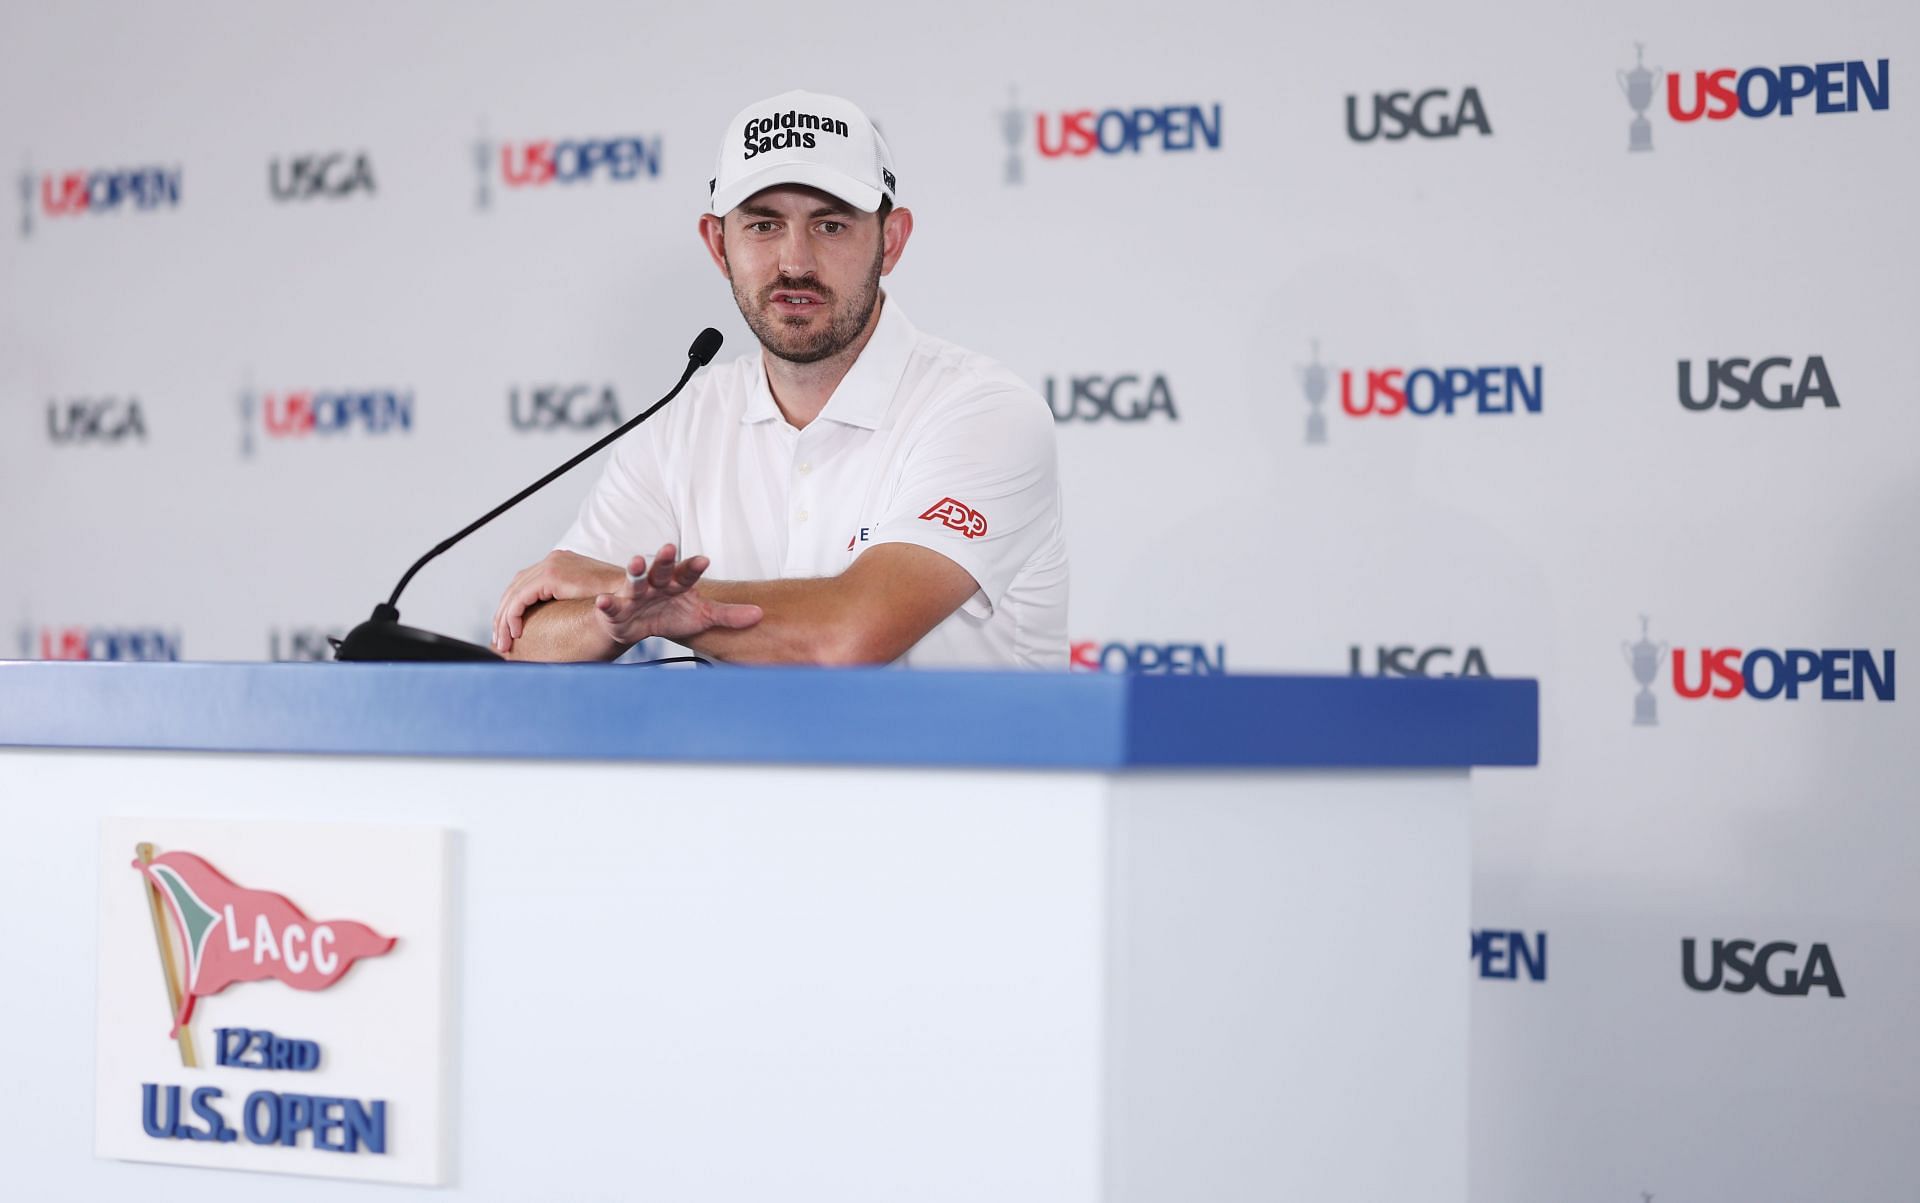 Can Patrick Cantlay land his first major win?